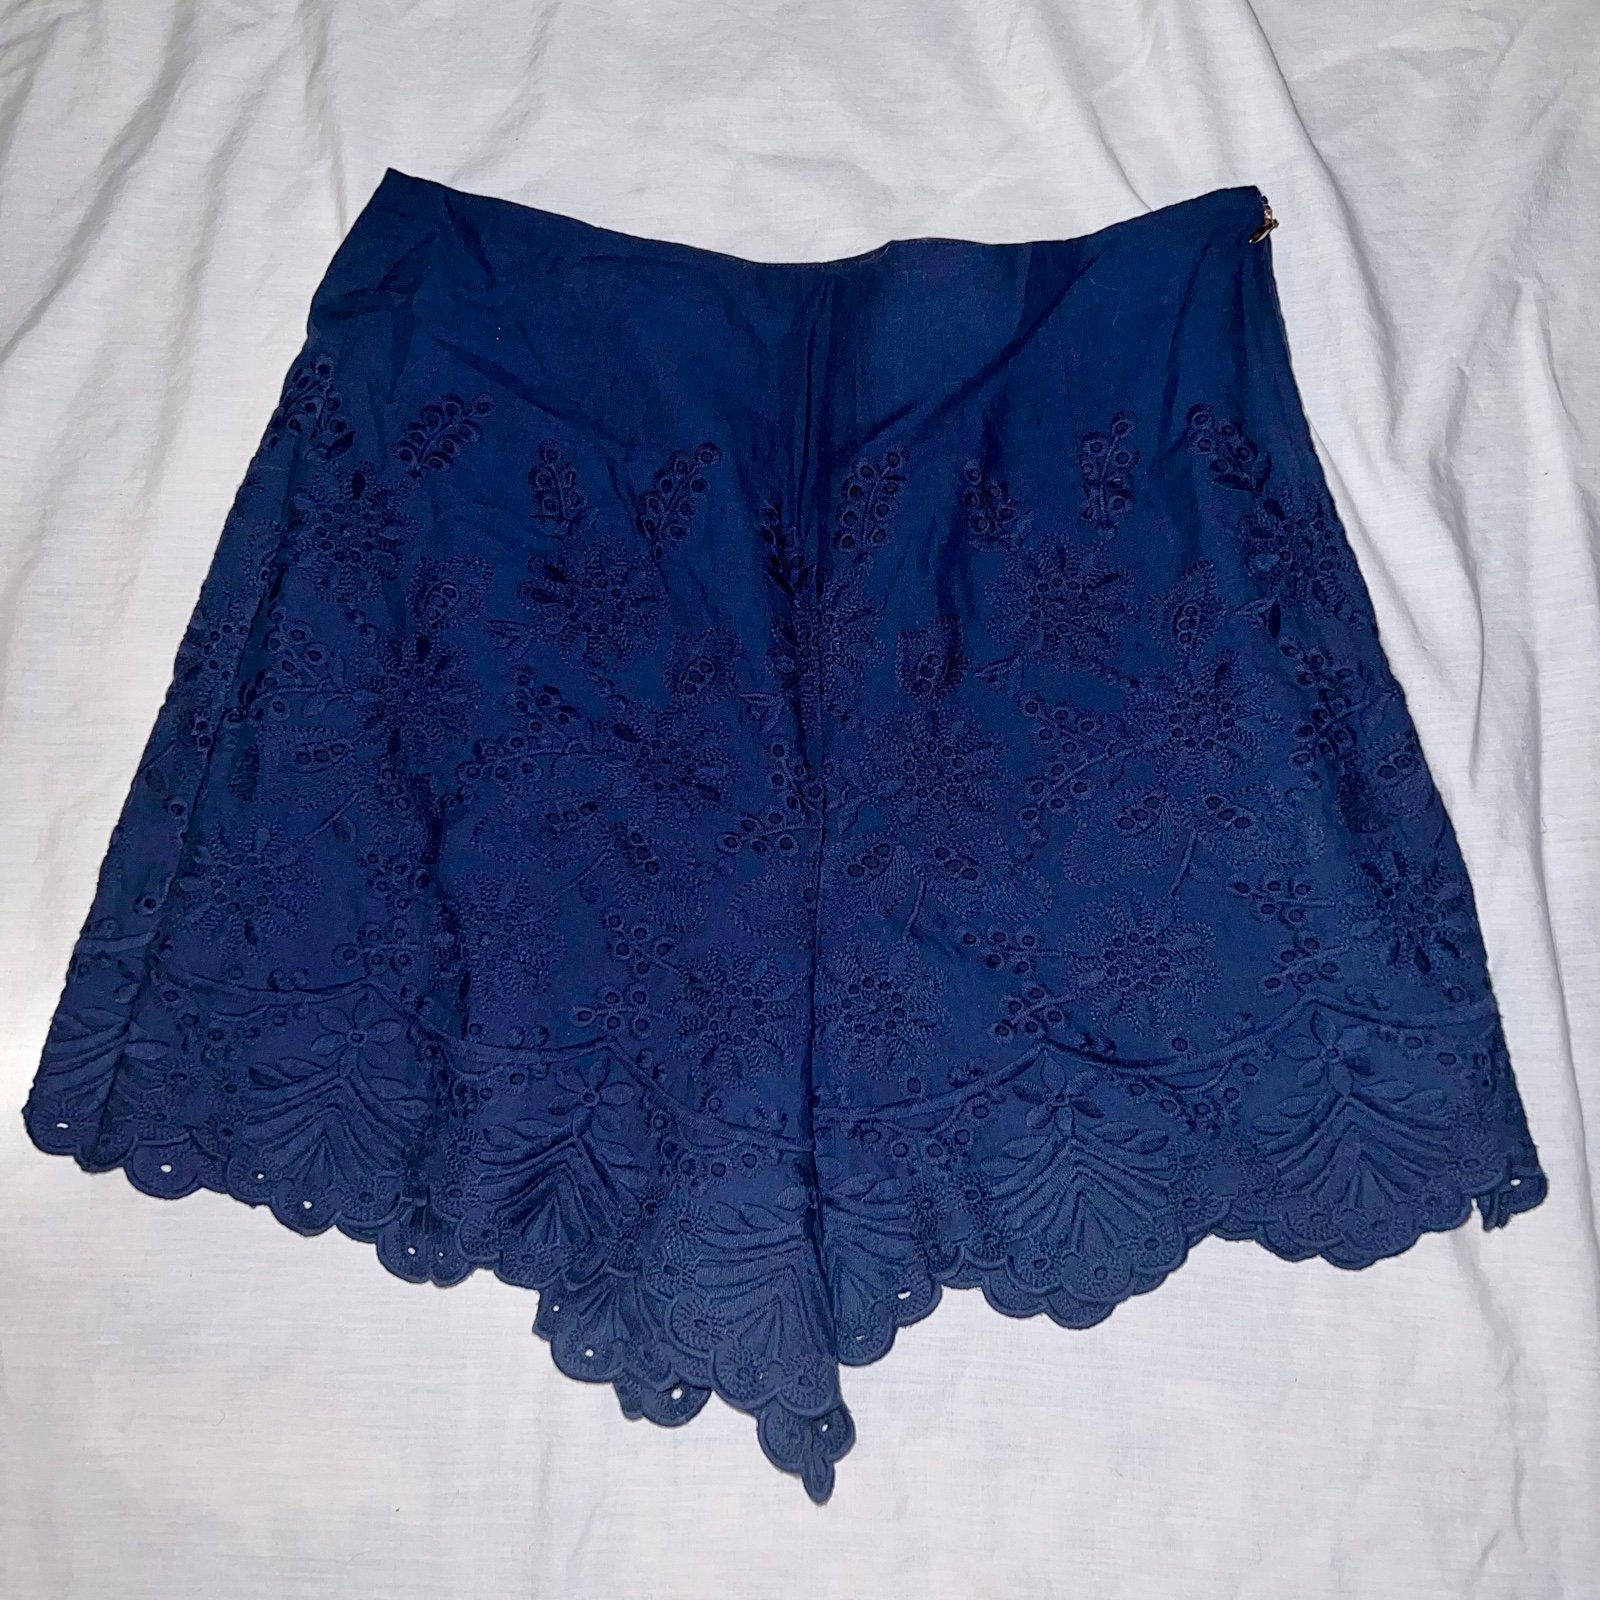 Discounted draper james eyelet lace shorts fipSqglTs Ch